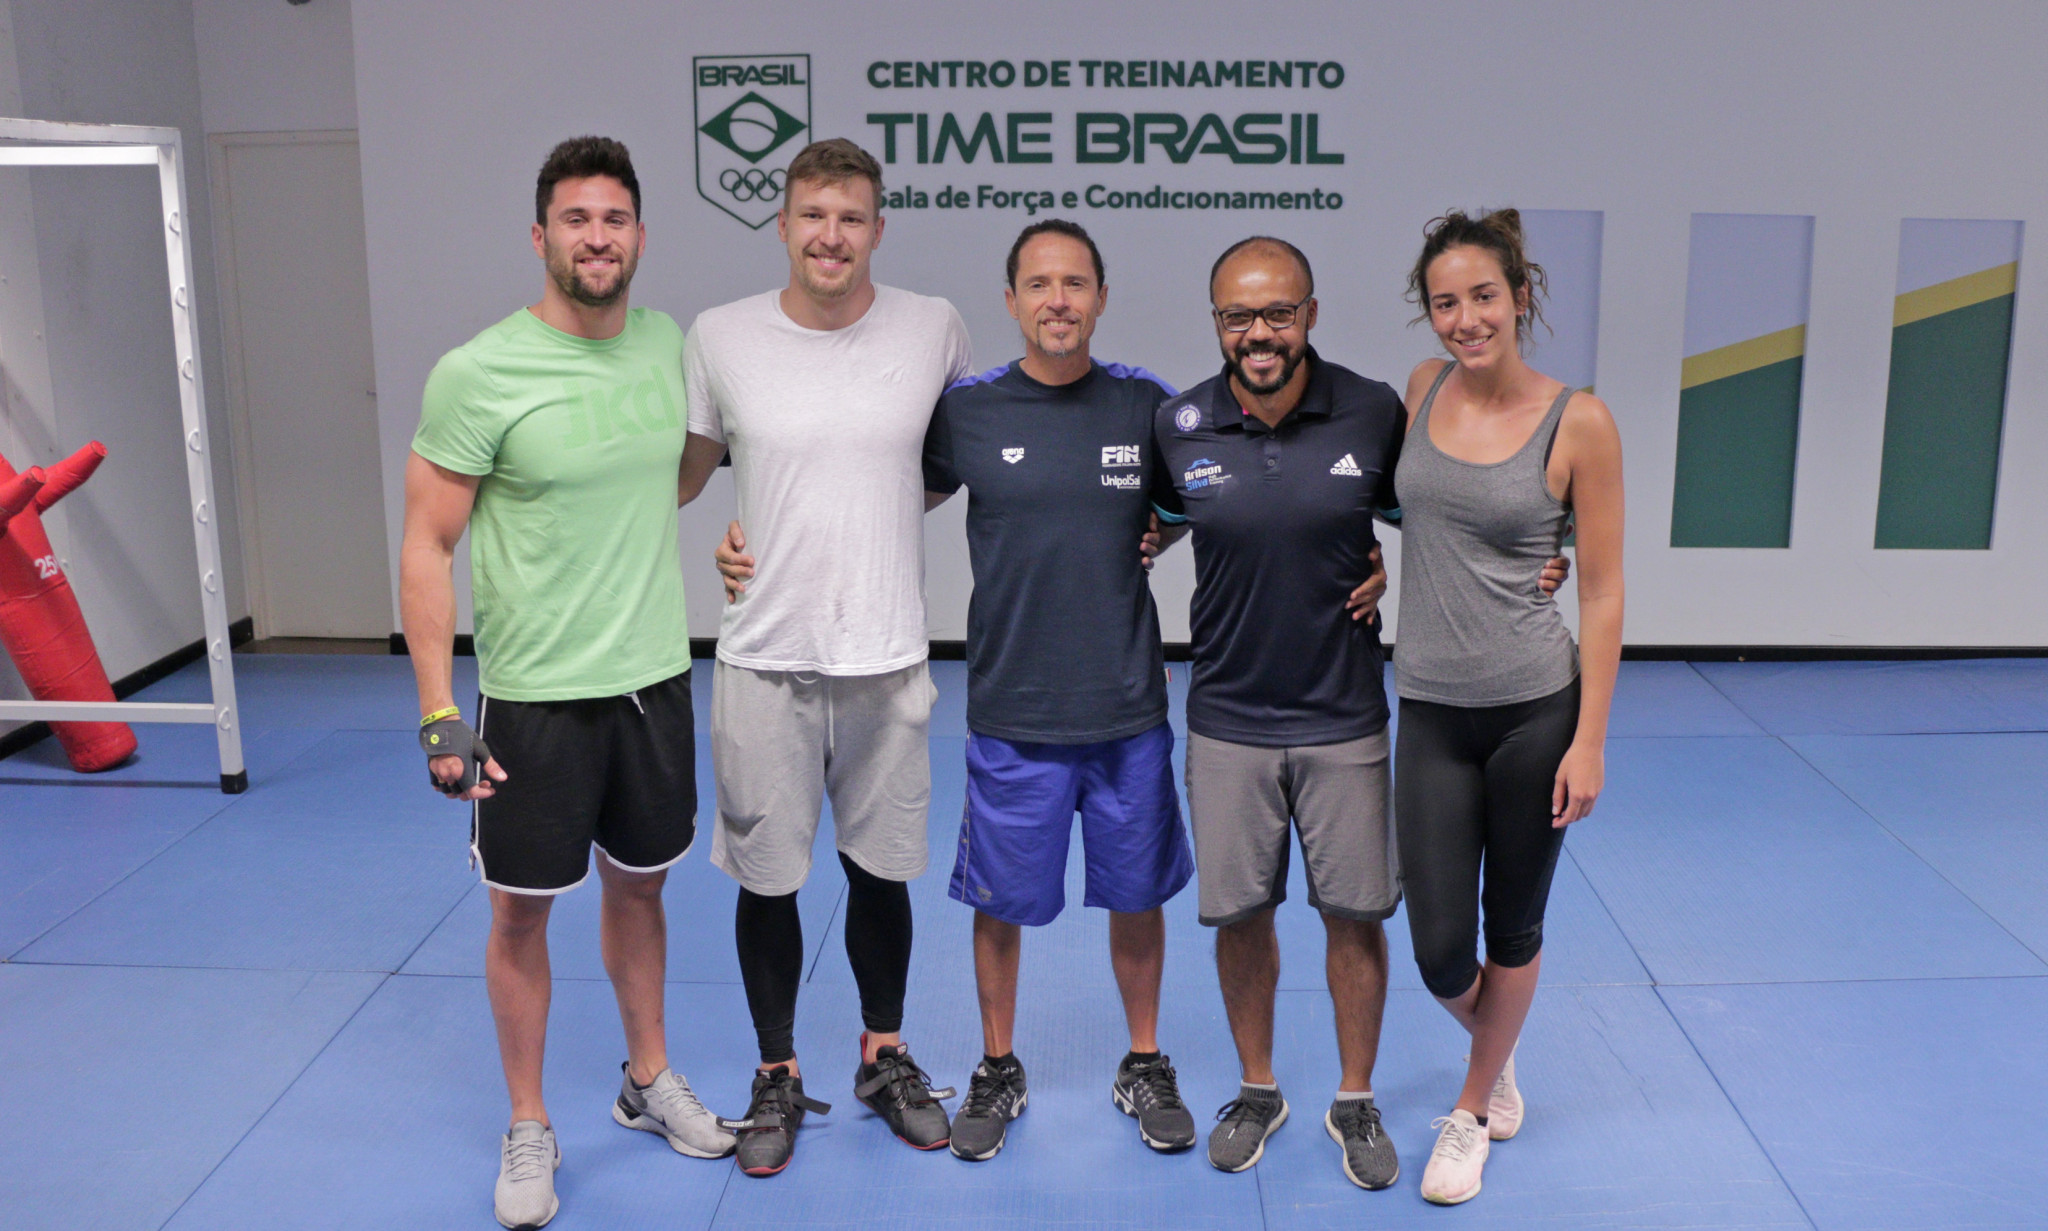 The Brazilian Olympic Committee say several foreign athletes have trained at the Team Brazil Training Centre in Rio de Janeiro this year ©COB